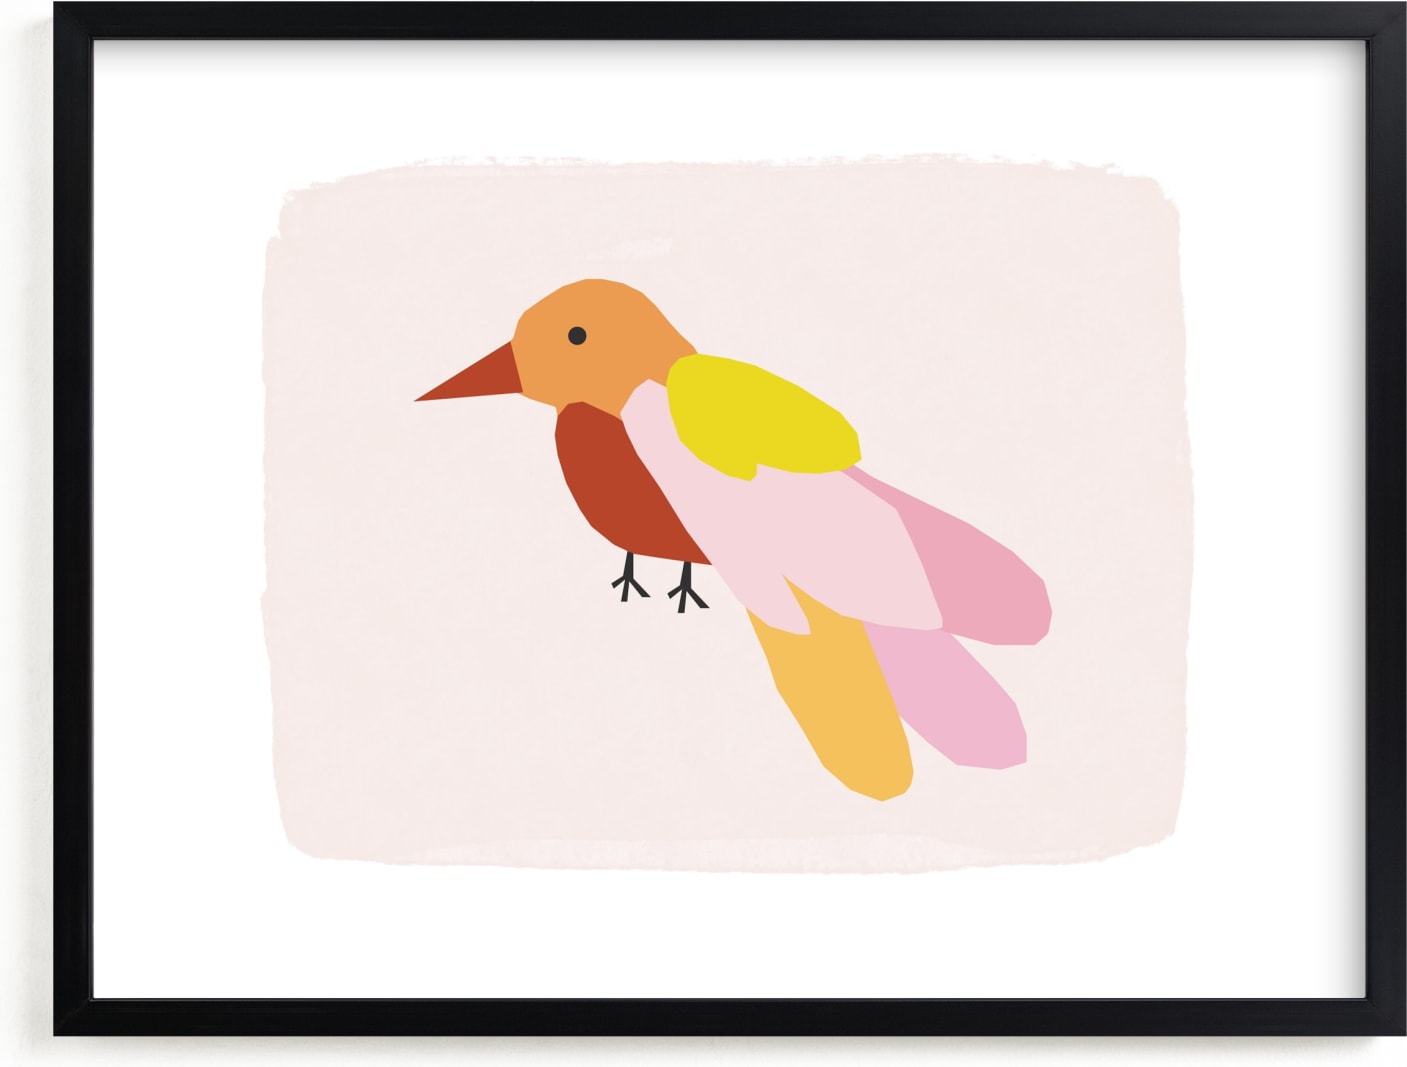 This is a colorful kids wall art by Morgan Kendall called Bird No. 2.